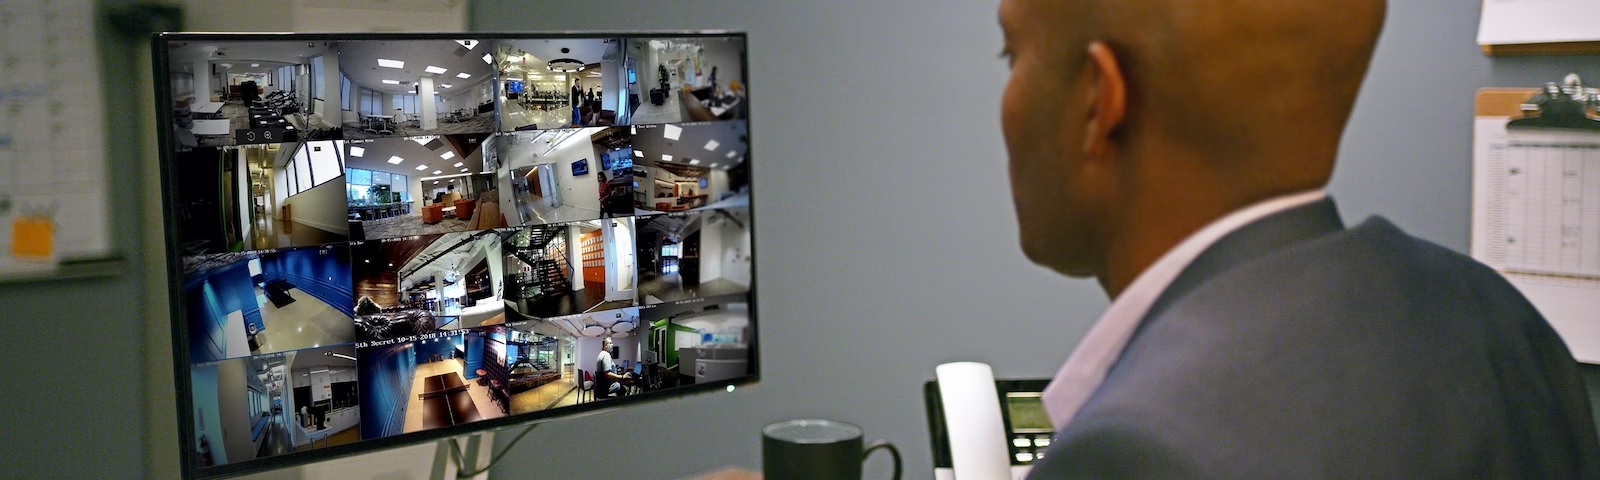 Example Of A Video Surveillance System